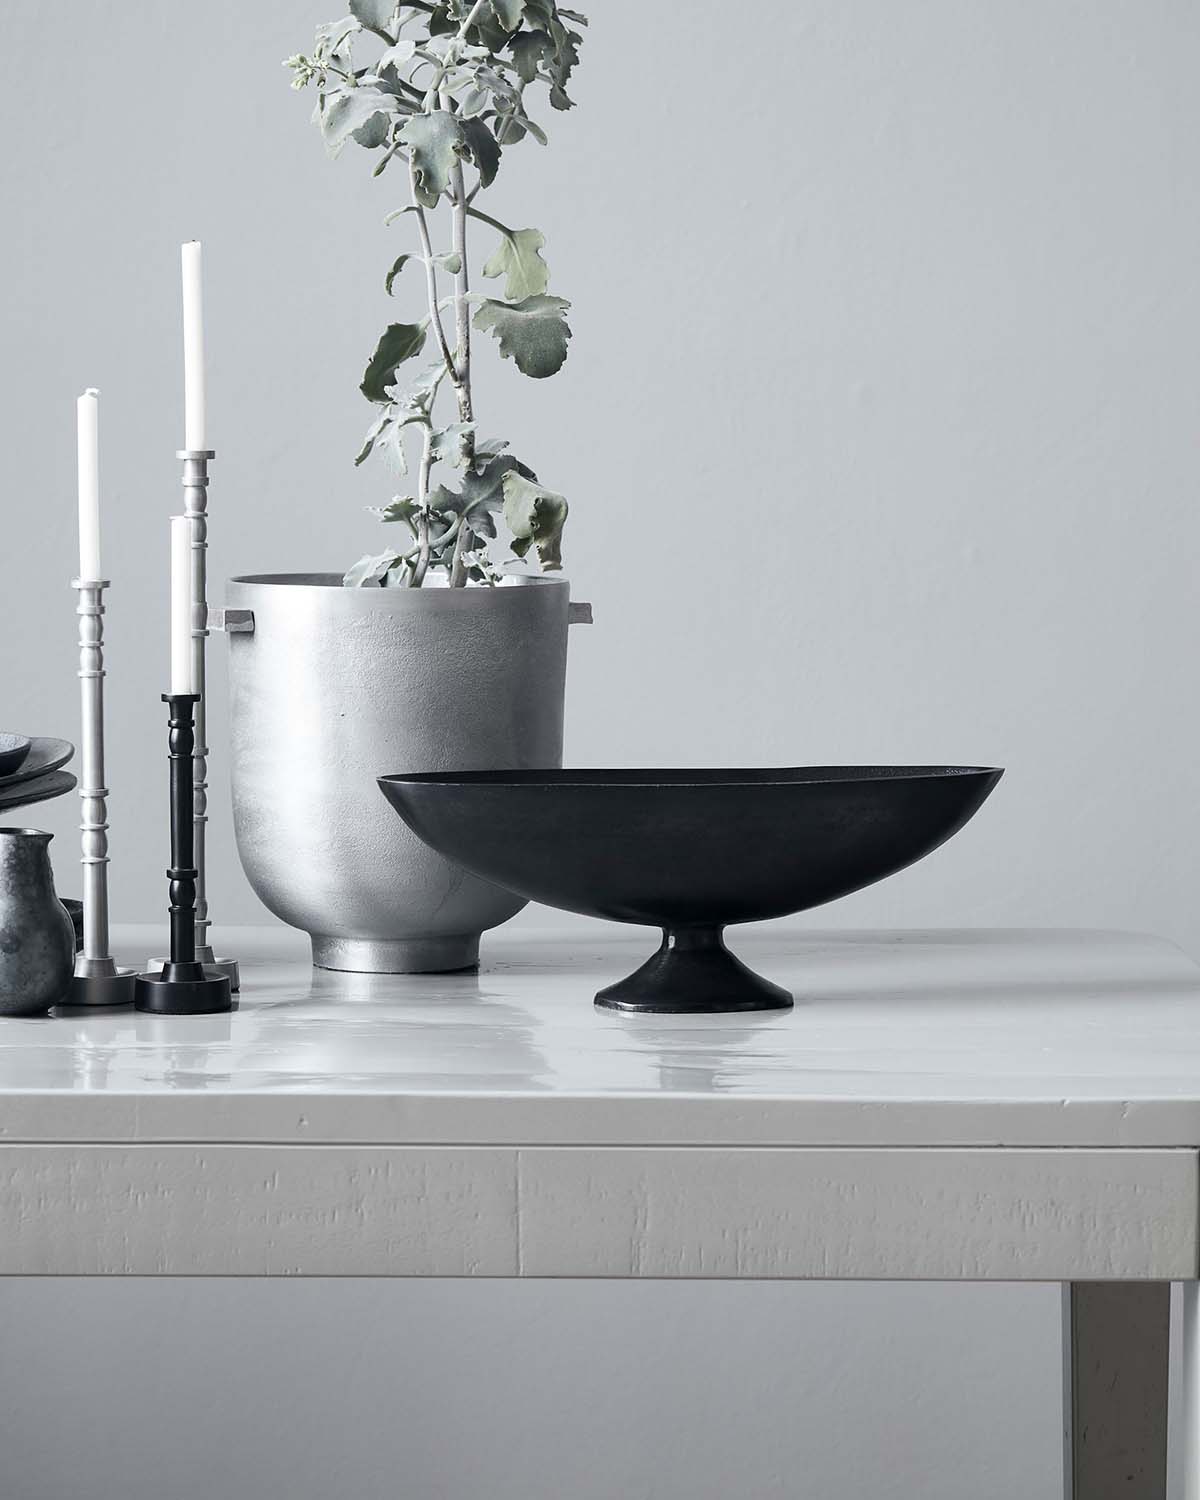 A black bowl sits on a sideboard with a silver plant pot and candlestick holders next to it